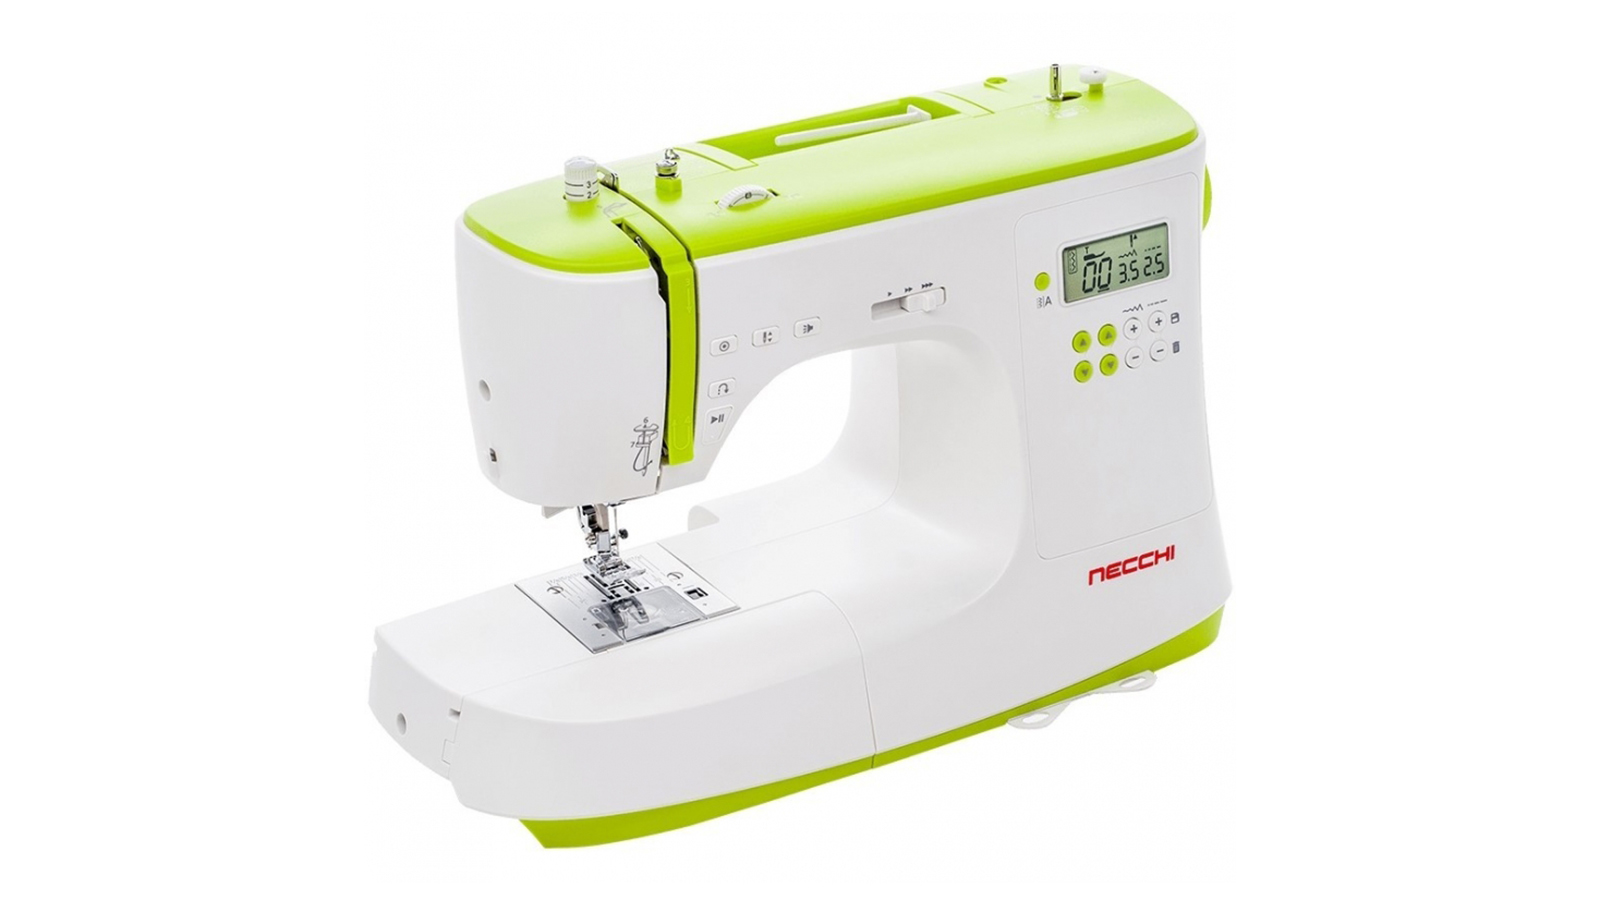 Necchi NC-102D sewing machine: touts a modern design, pop of color, and 200 utility and decorative stitches